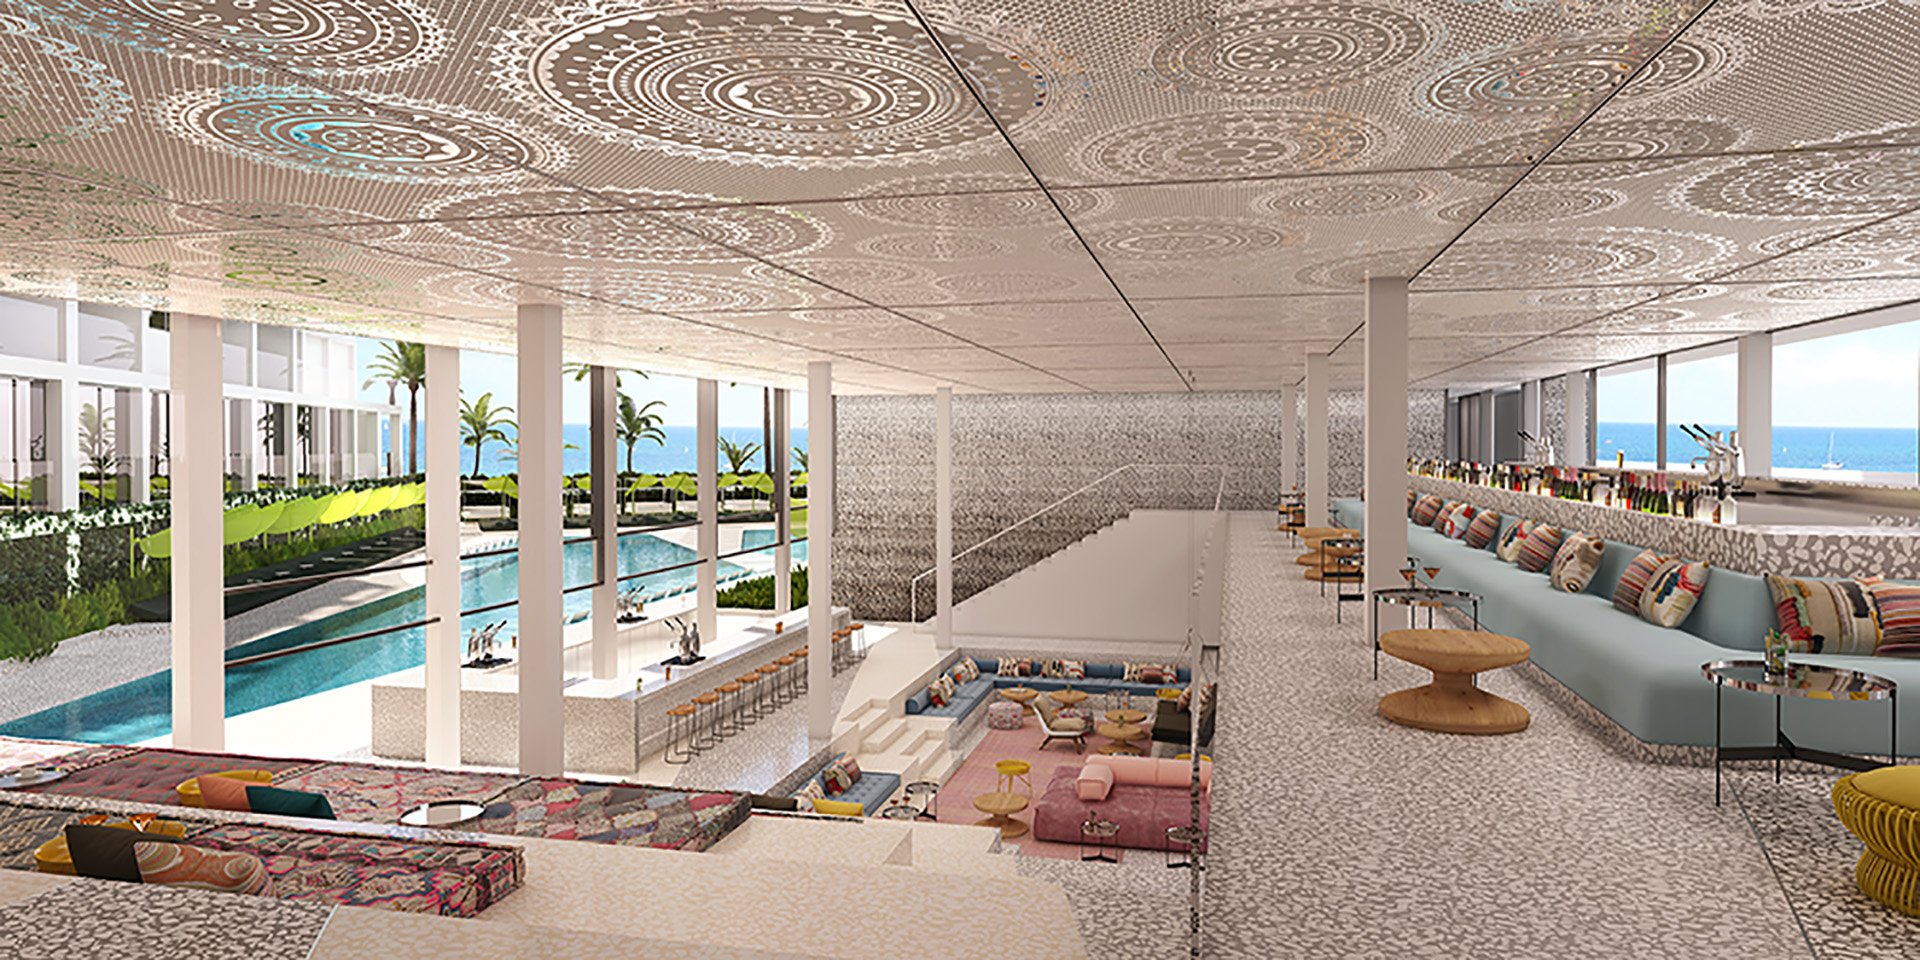 W Hotels Worldwide has planned to open the W Ibiza in the beachfront neighborhood of Santa Eulalia del Ro in summer 2019